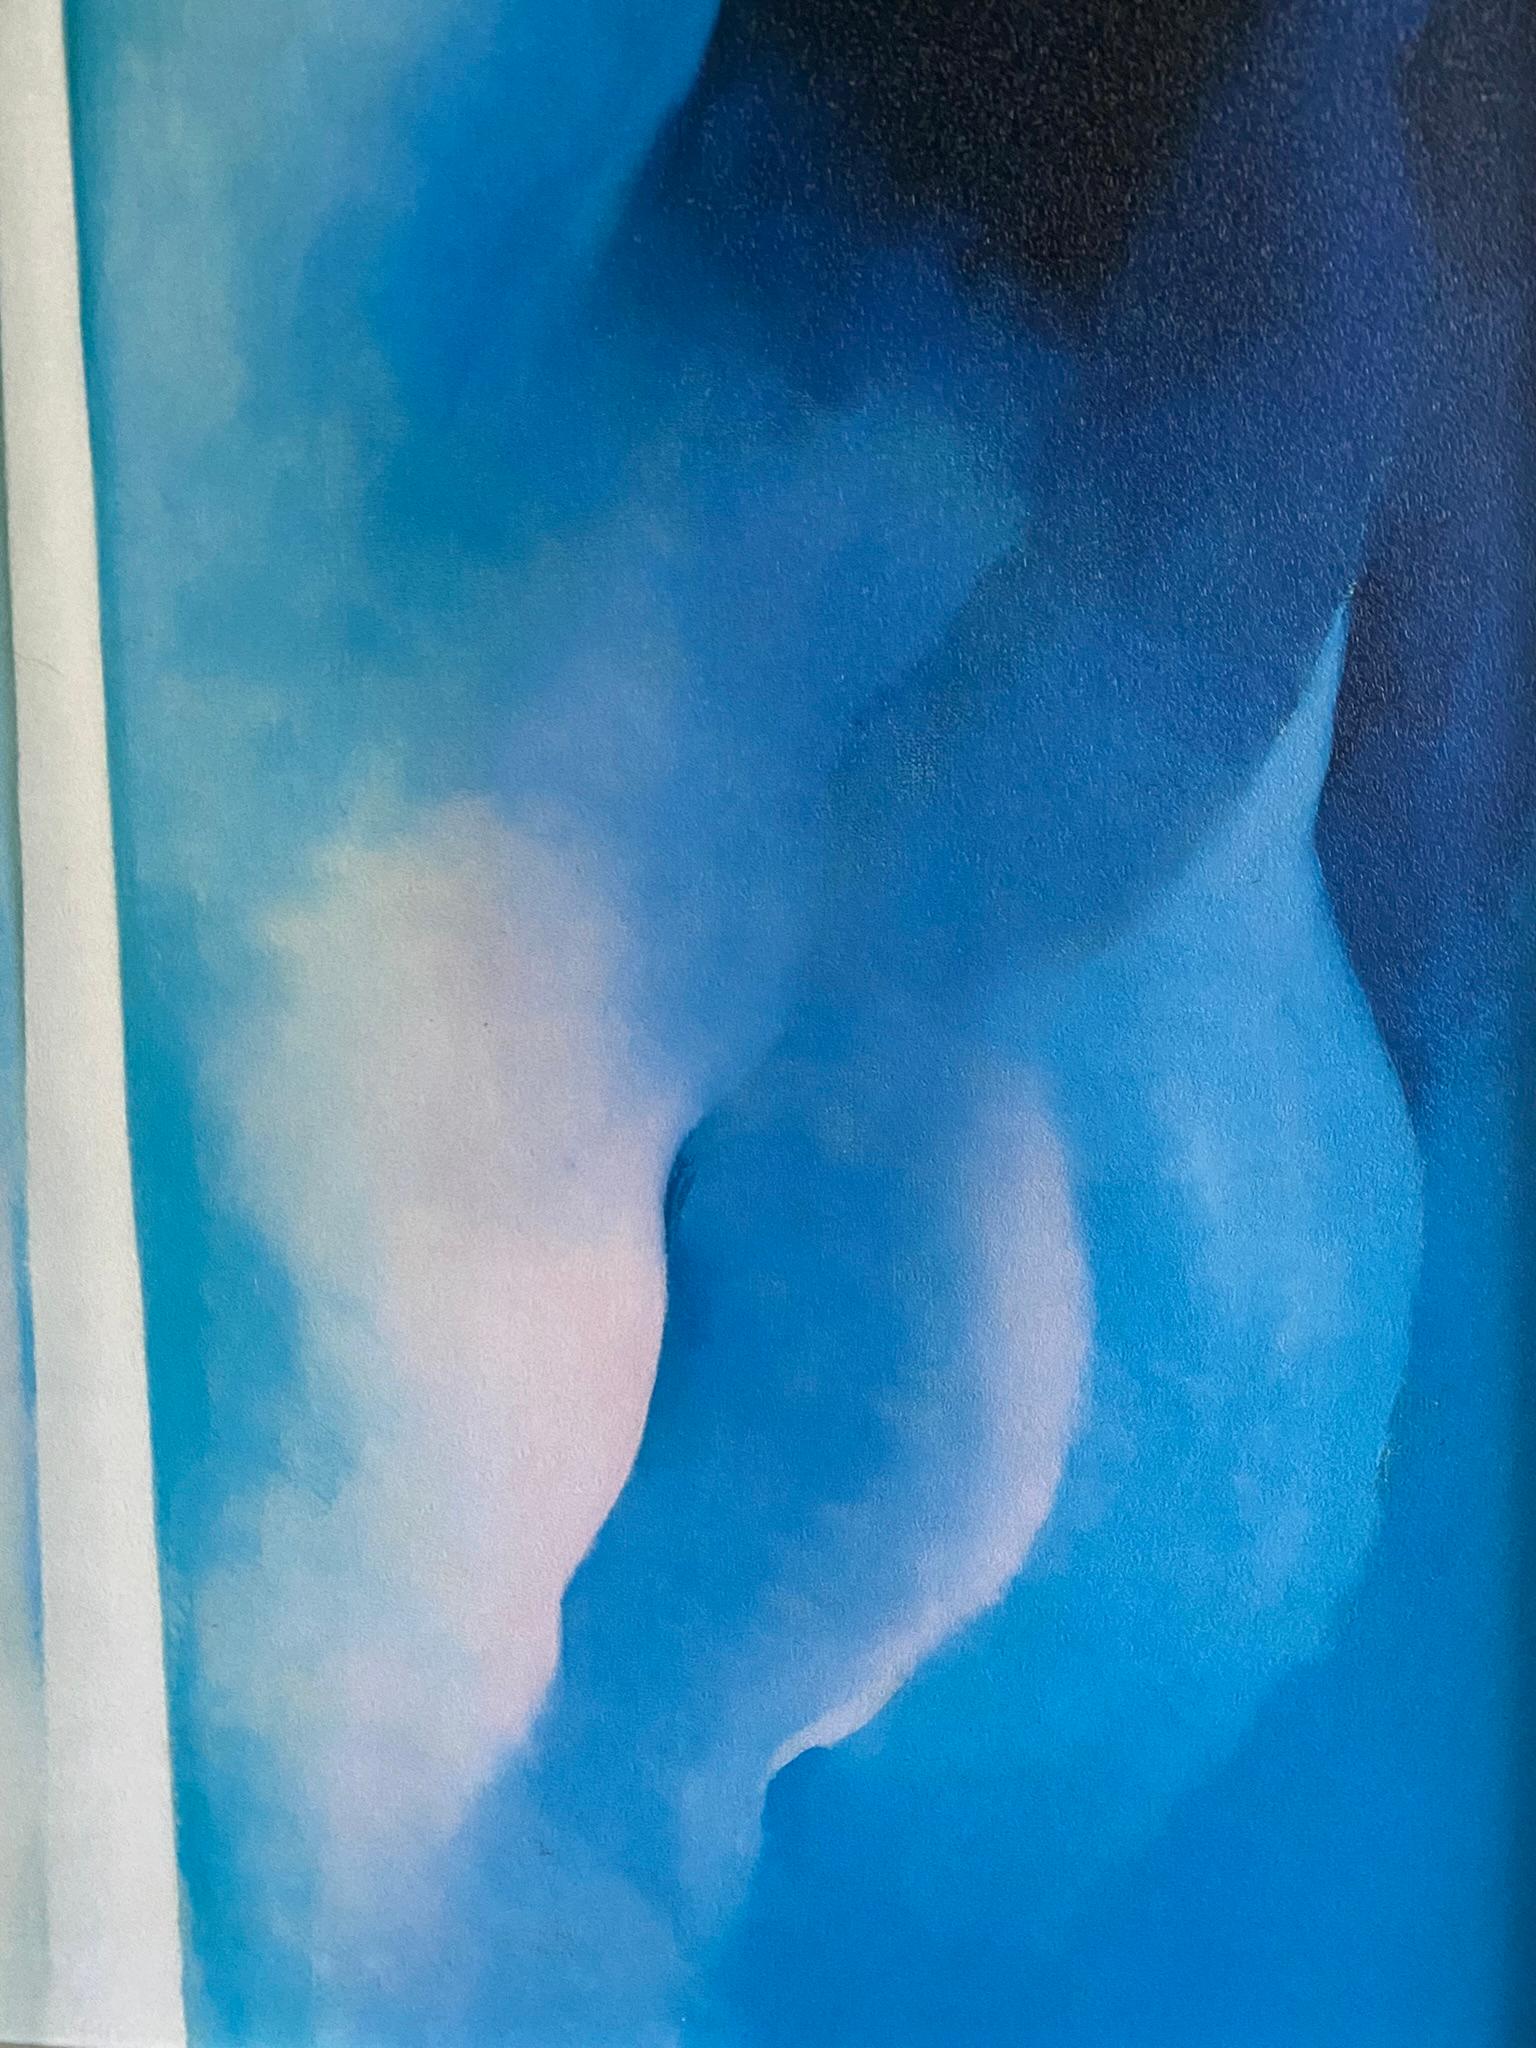 Georgia O'Keeffe-High Quality print by MoMA circa1997-Abstraction Blue-GSYStudio For Sale 12